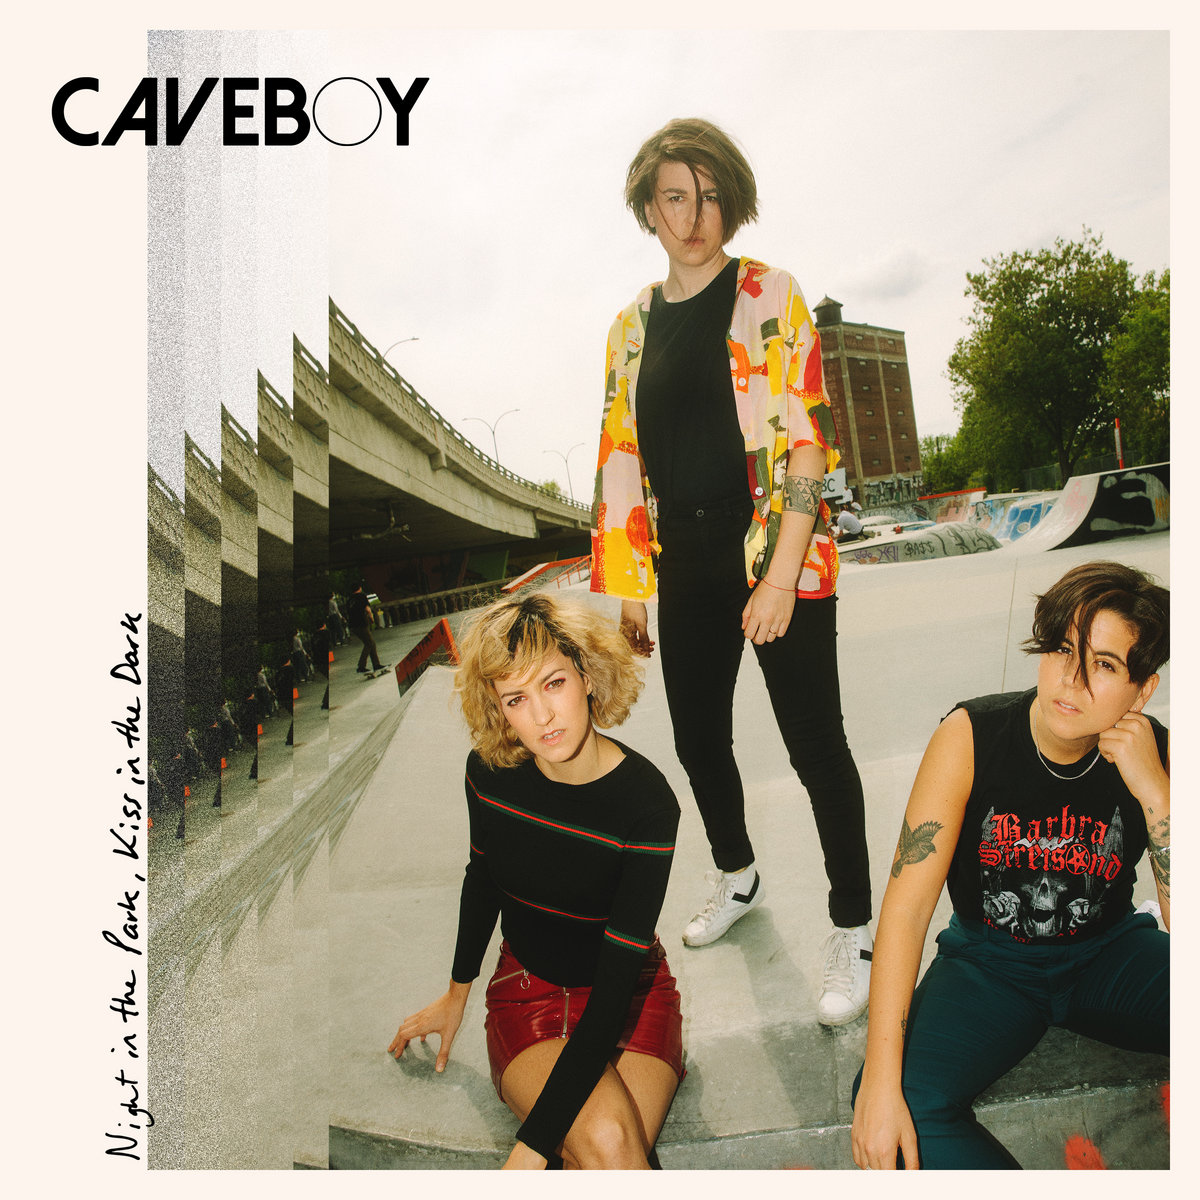 40. Night In The Dark, Kiss In The Dark - Caveboy.Until this year I'd never heard of this band,but upon seeing Bright Light Bright Light mention them,I decided to check out their album. I'm so glad I did. Best tracks:Silk For GoldHide Your LoveFind MeLandslide